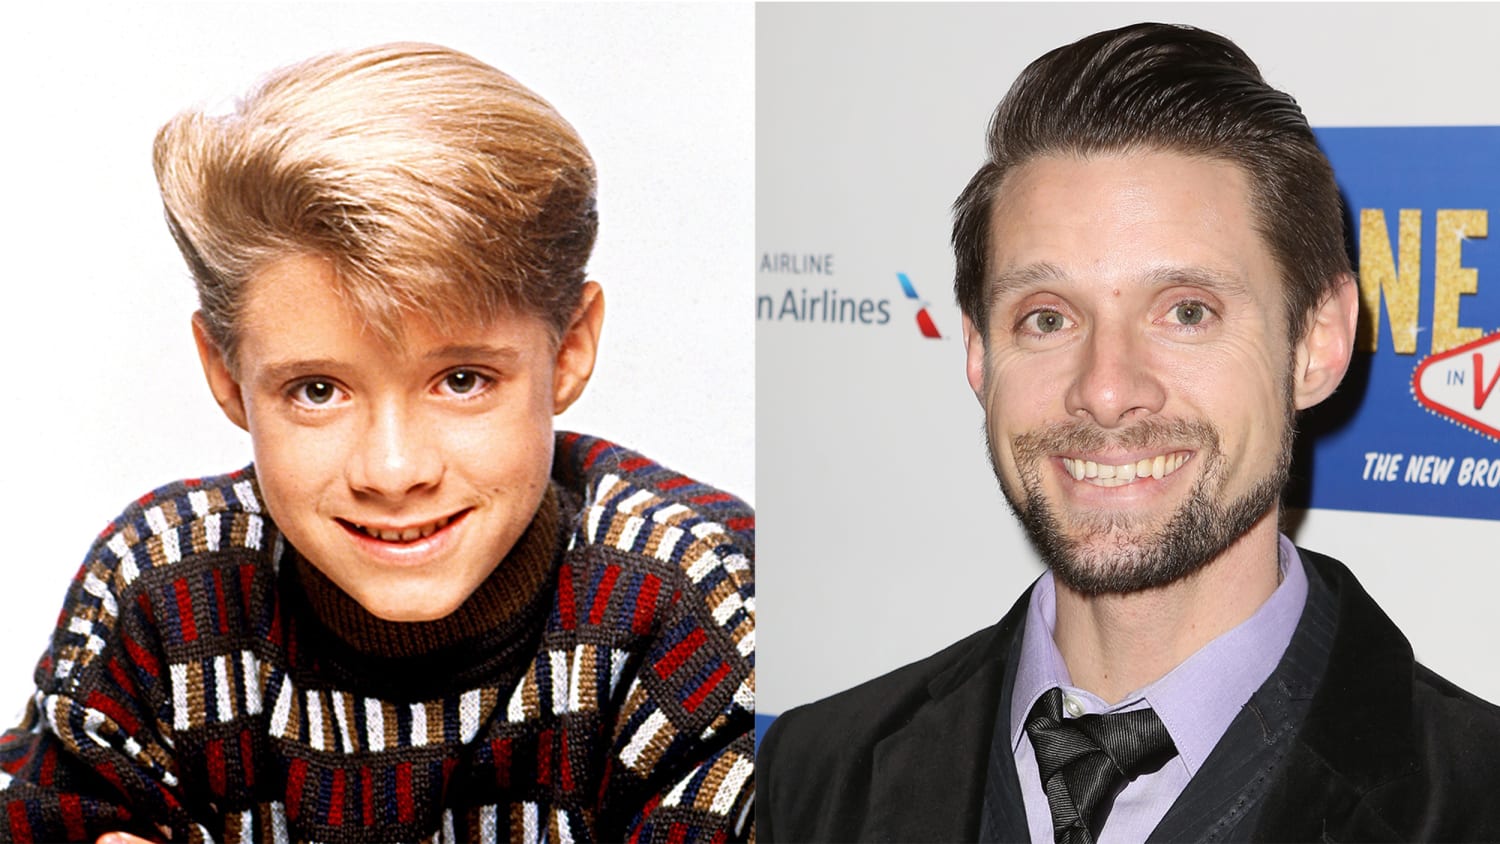 Who's the Boss?' star Danny Pintauro says he's been HIV-positive 12 years